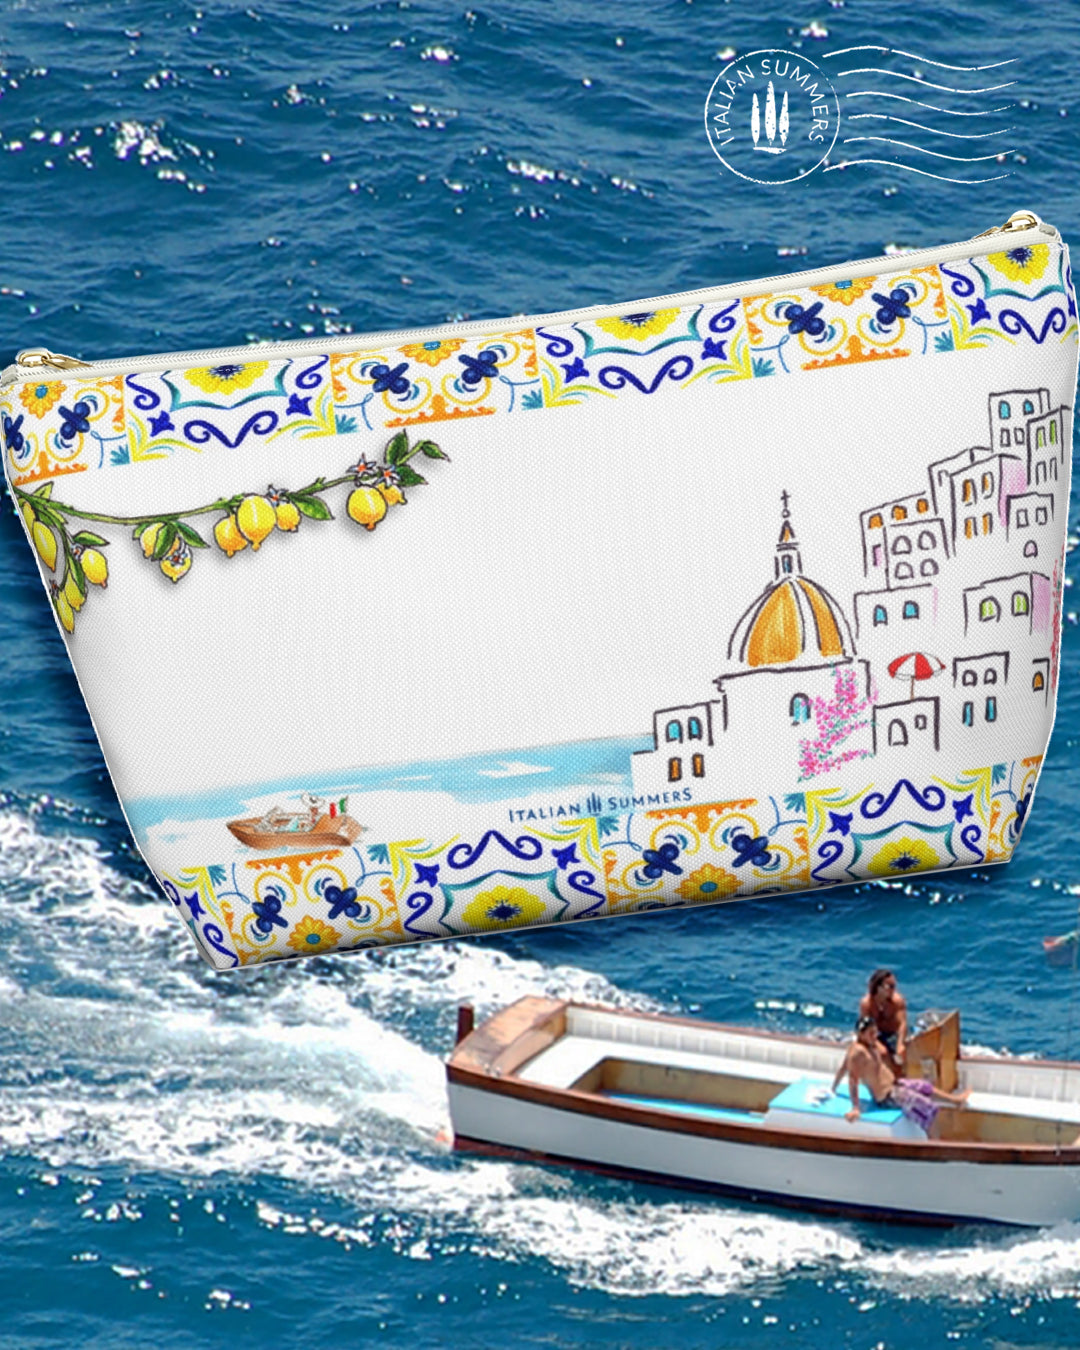 An Italy inspired white canvas clutch with the text Find me in Italy. On the front ther is a sketch of a lady on a striped beach towel under a blue and white beach umbrella seen from above. On the top and bottom there is a rim with blue and yello Italian tiles. In the back there is a sketch of Positano and a Riva boat in the sea. Front and back have also some lemon branches. Designed by Italian Summers